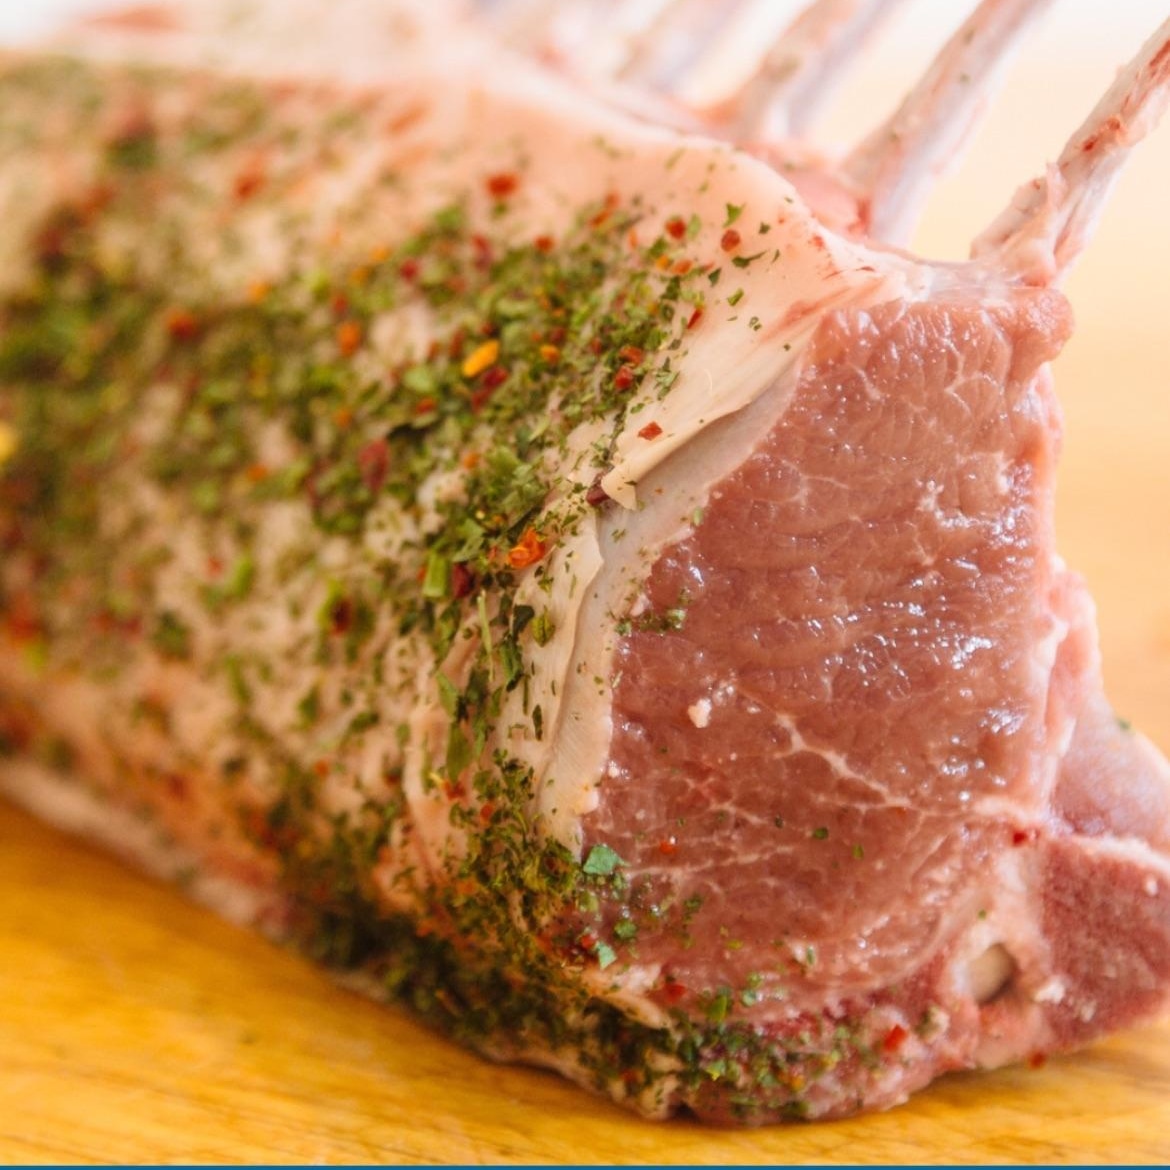 New season lamb in stock and available for Easter Weekend. Dry aged Irish Wagyu X and Organic Dexter also available. Free Range pork, Goat & Venison Something for everyone #knowyourbutcher #irishfood #easter #bankholiday